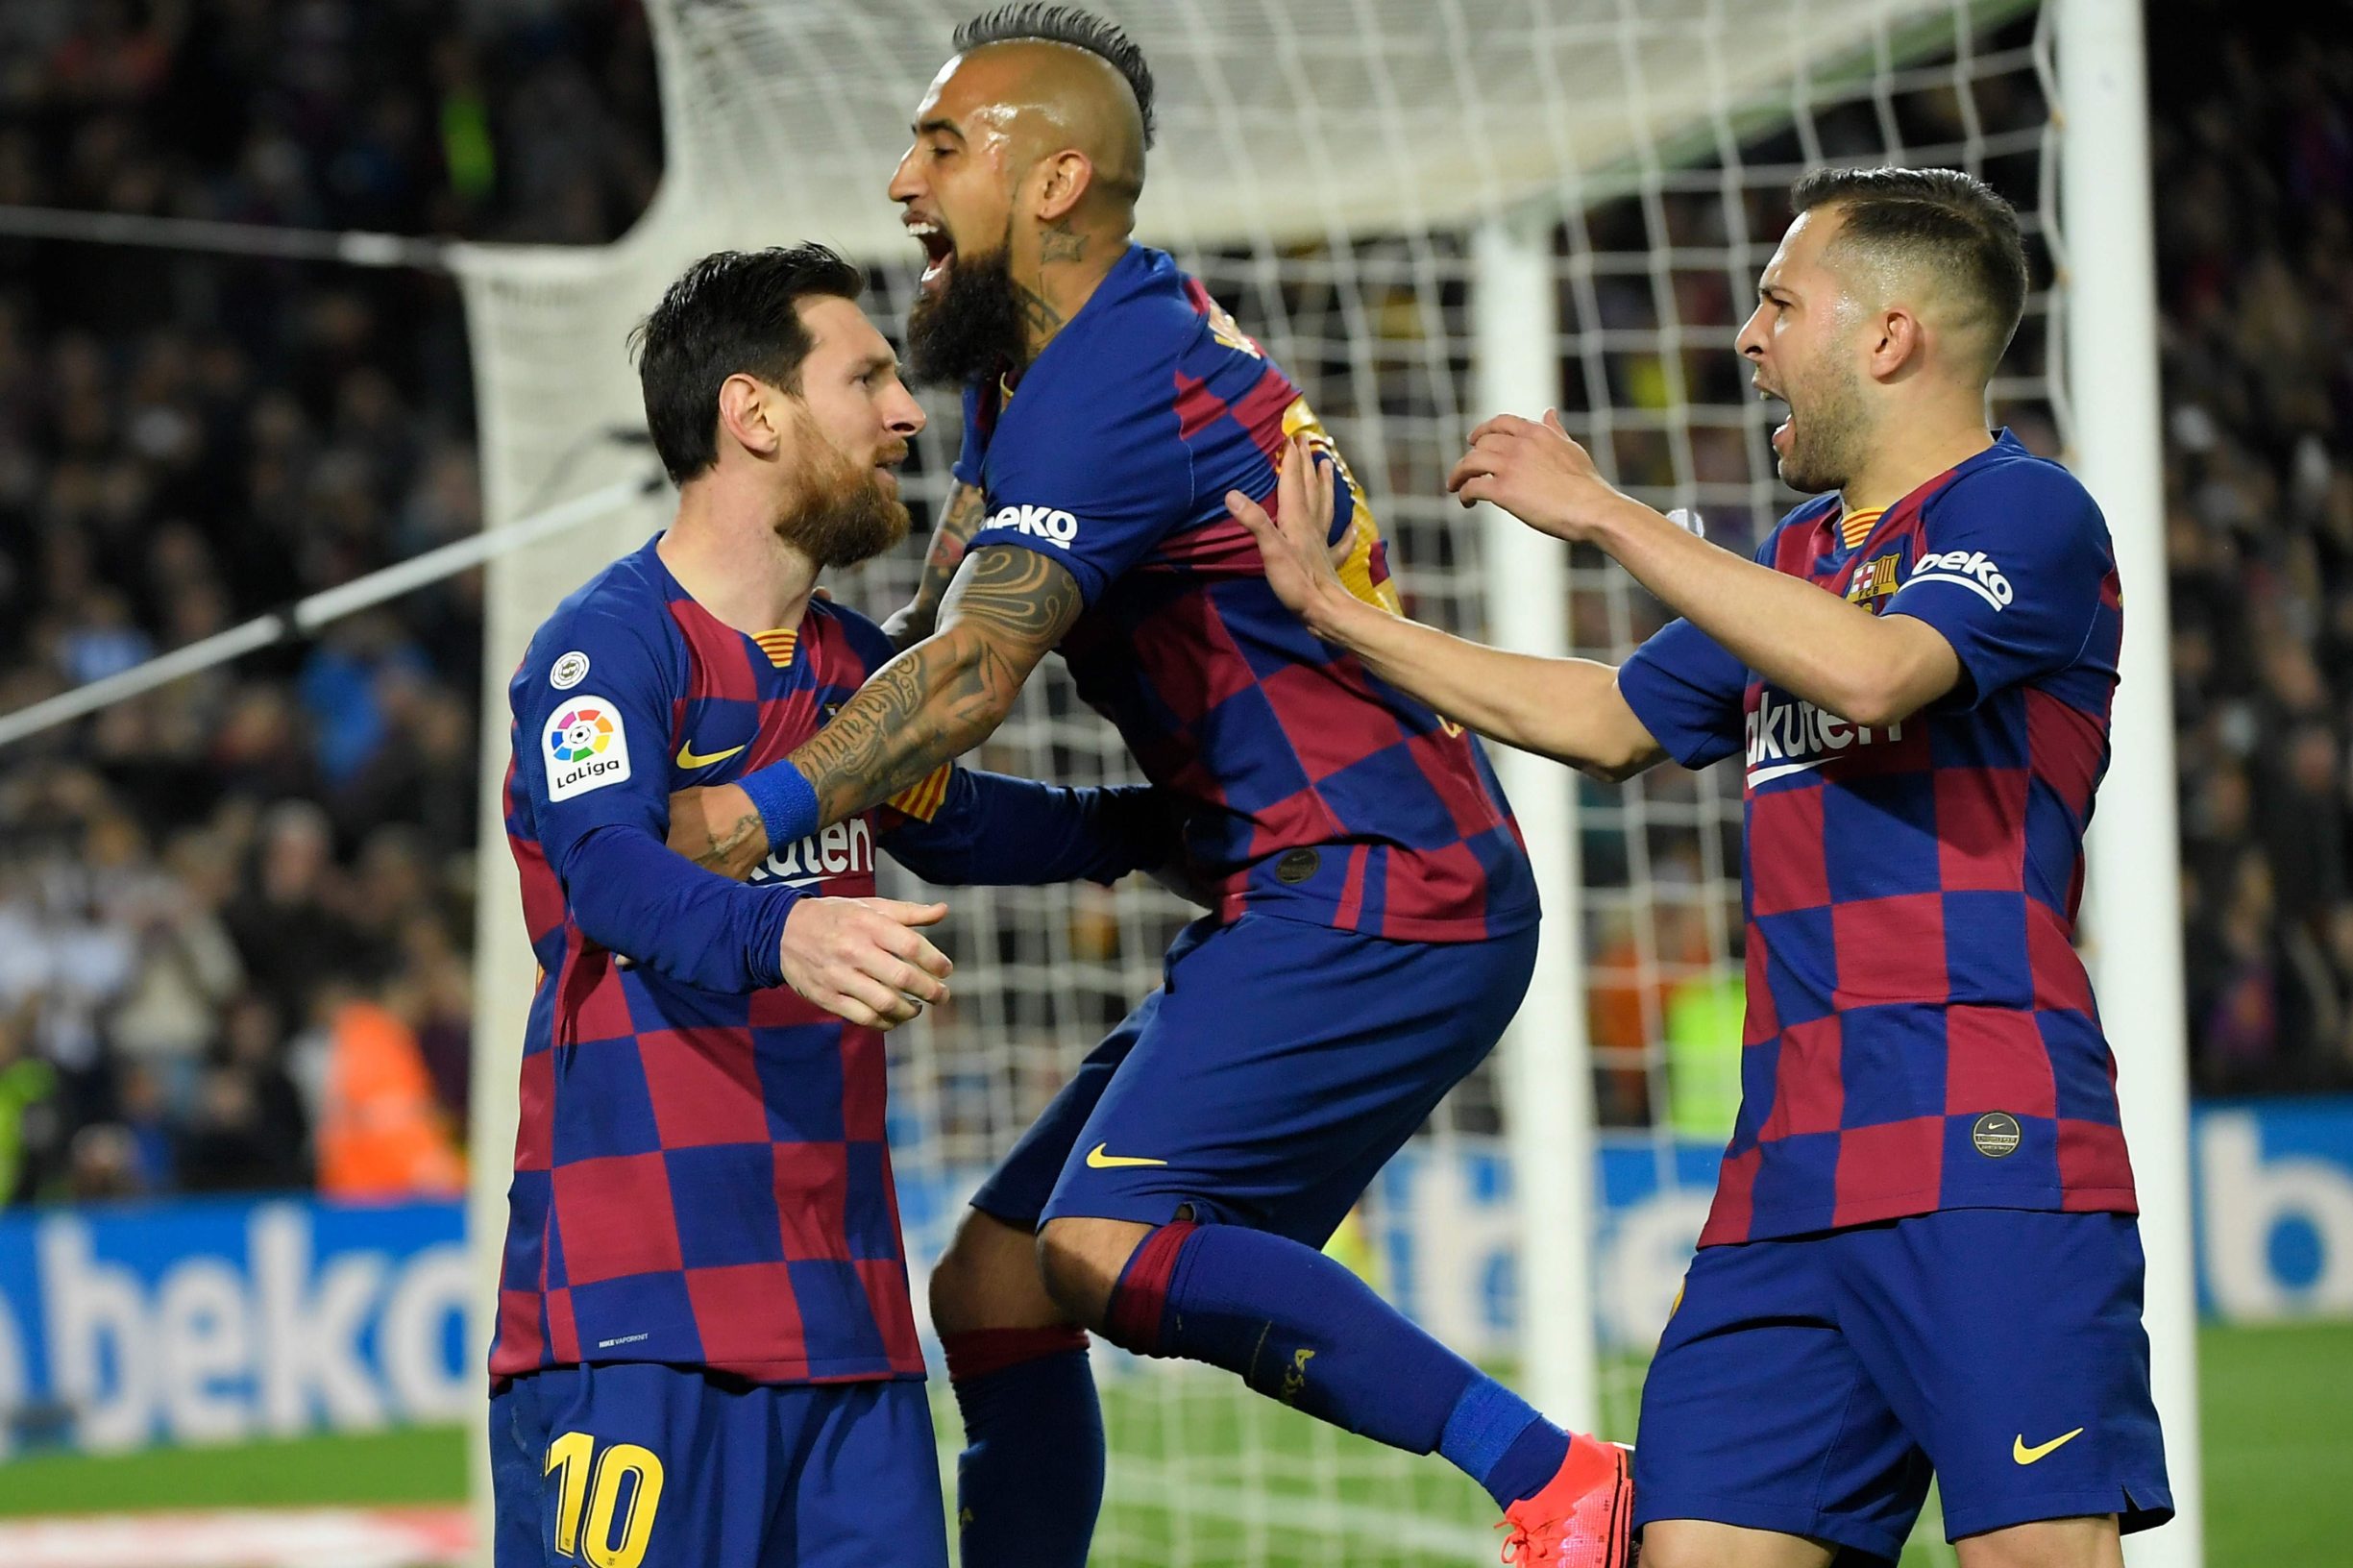 Barcelona's Argentine forward Lionel Messi (L) celebrates with Barcelona's Chilean midfielder Arturo Vidal and Barcelona's Spanish defender Jordi Alba after scoring a goal during the Spanish league football match between FC Barcelona and Real Sociedad at the Camp Nou stadium in Barcelona on March 7, 2020. (Photo by LLUIS GENE / AFP)